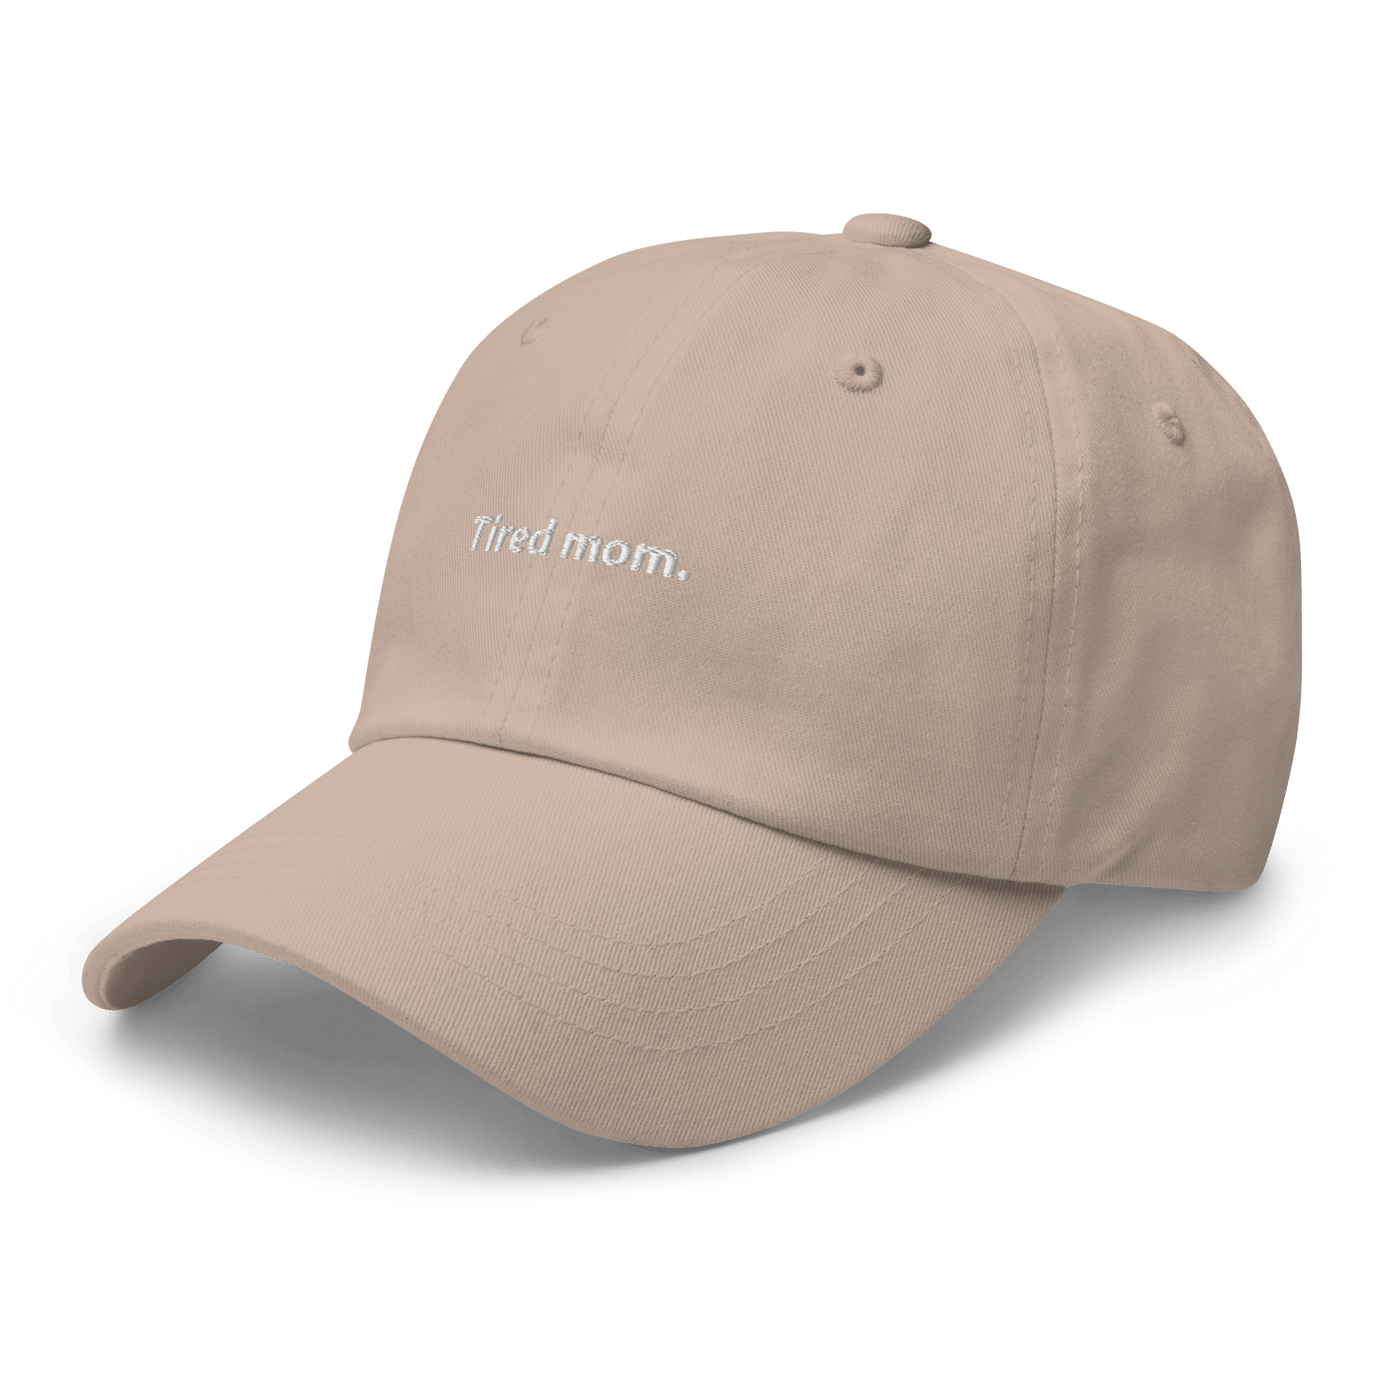 Tired mom Dad hat - Stone - - Just Another Cap Store